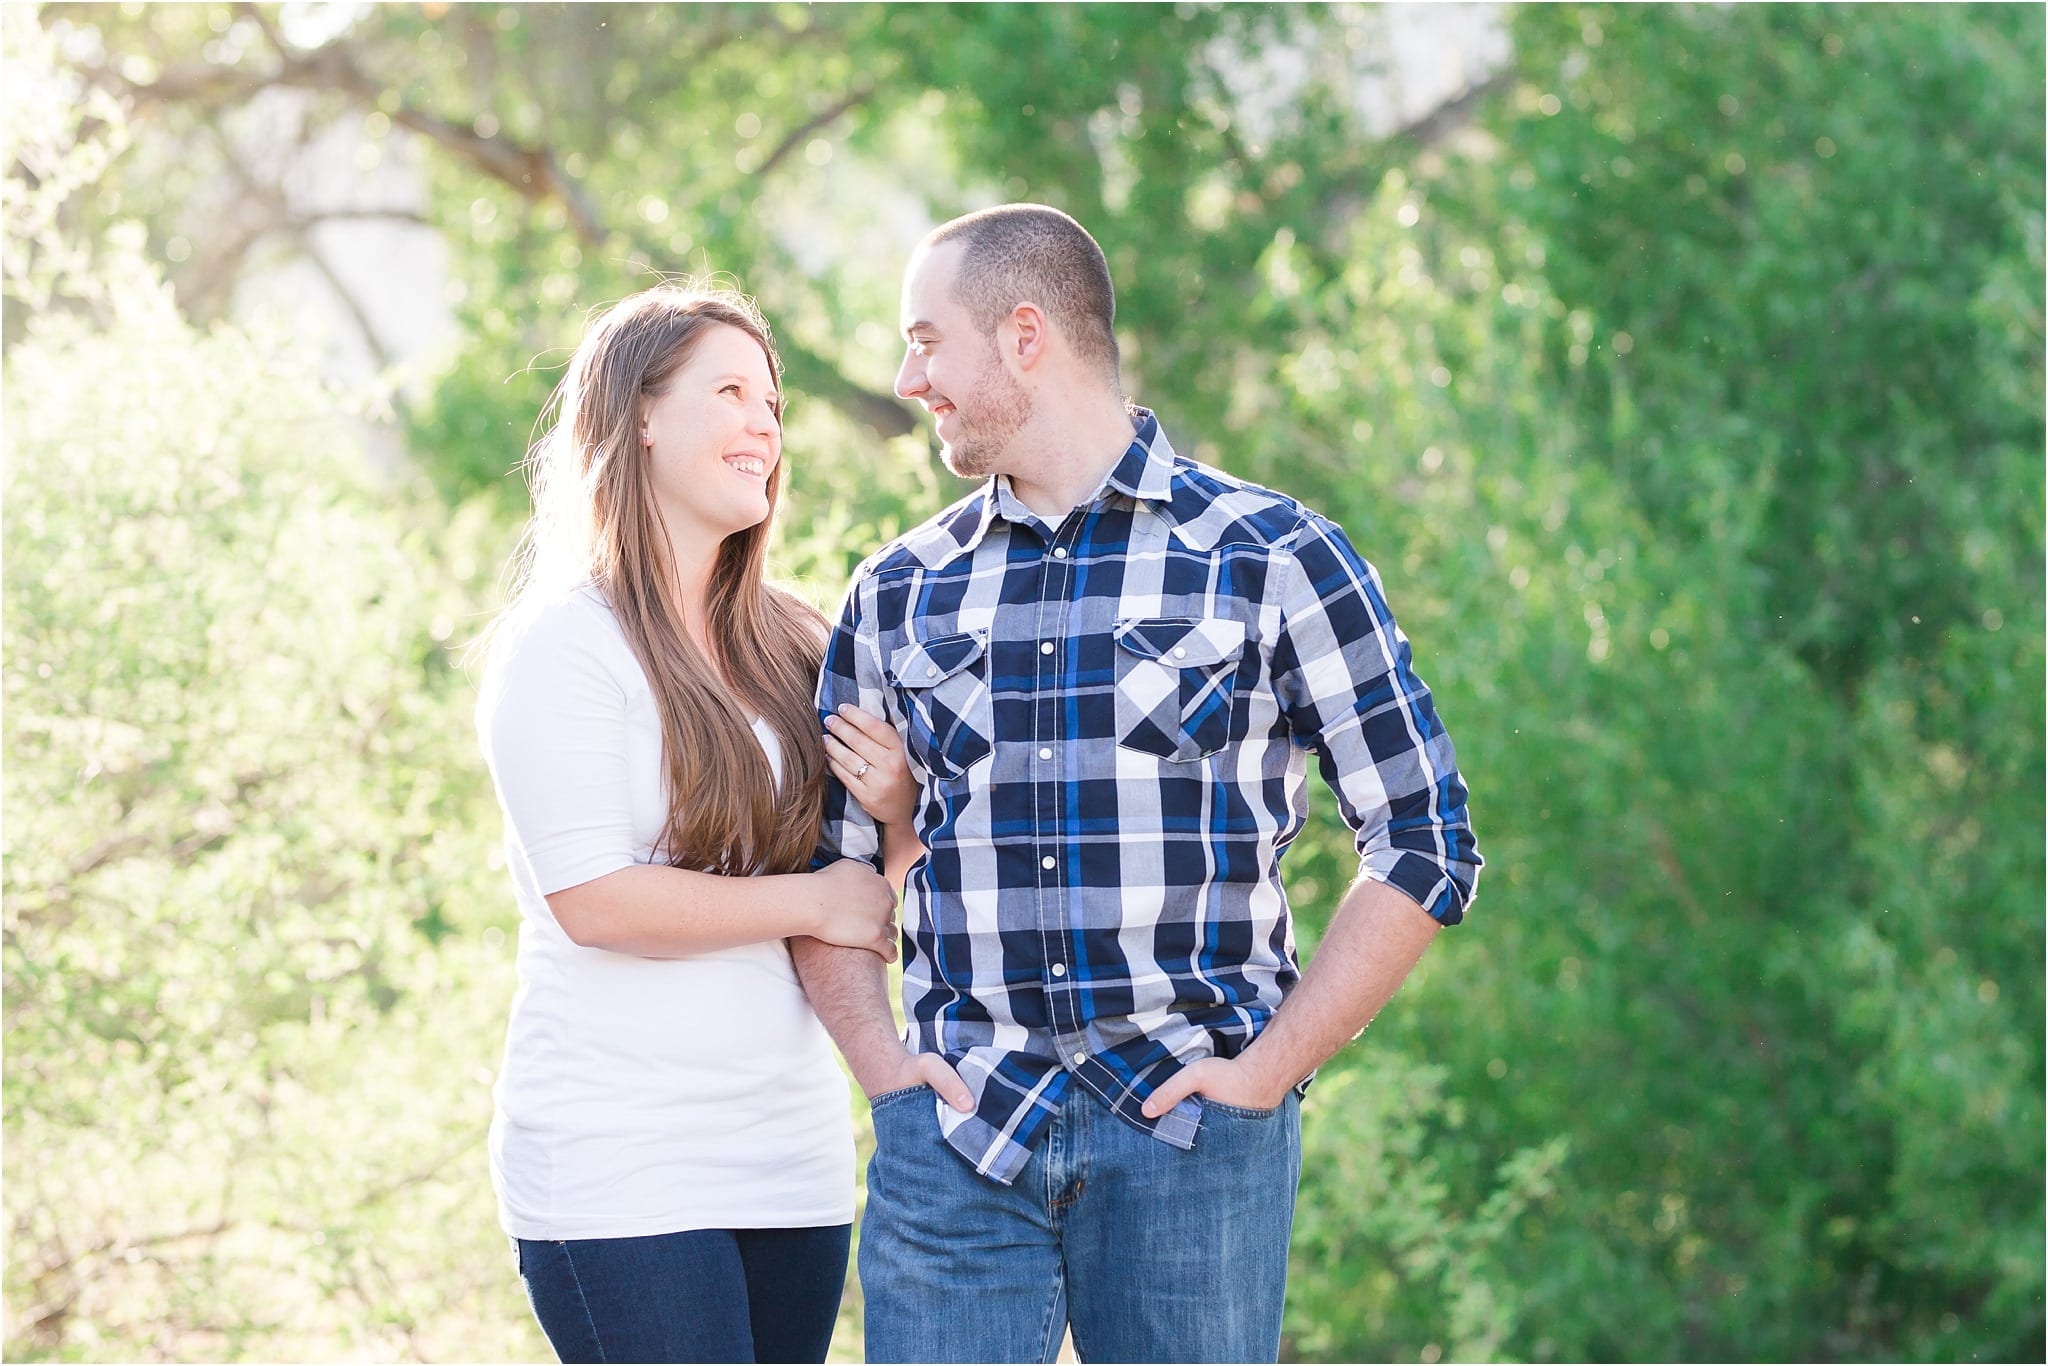 Cave Creek Engagement Pictures | Sara and Cody